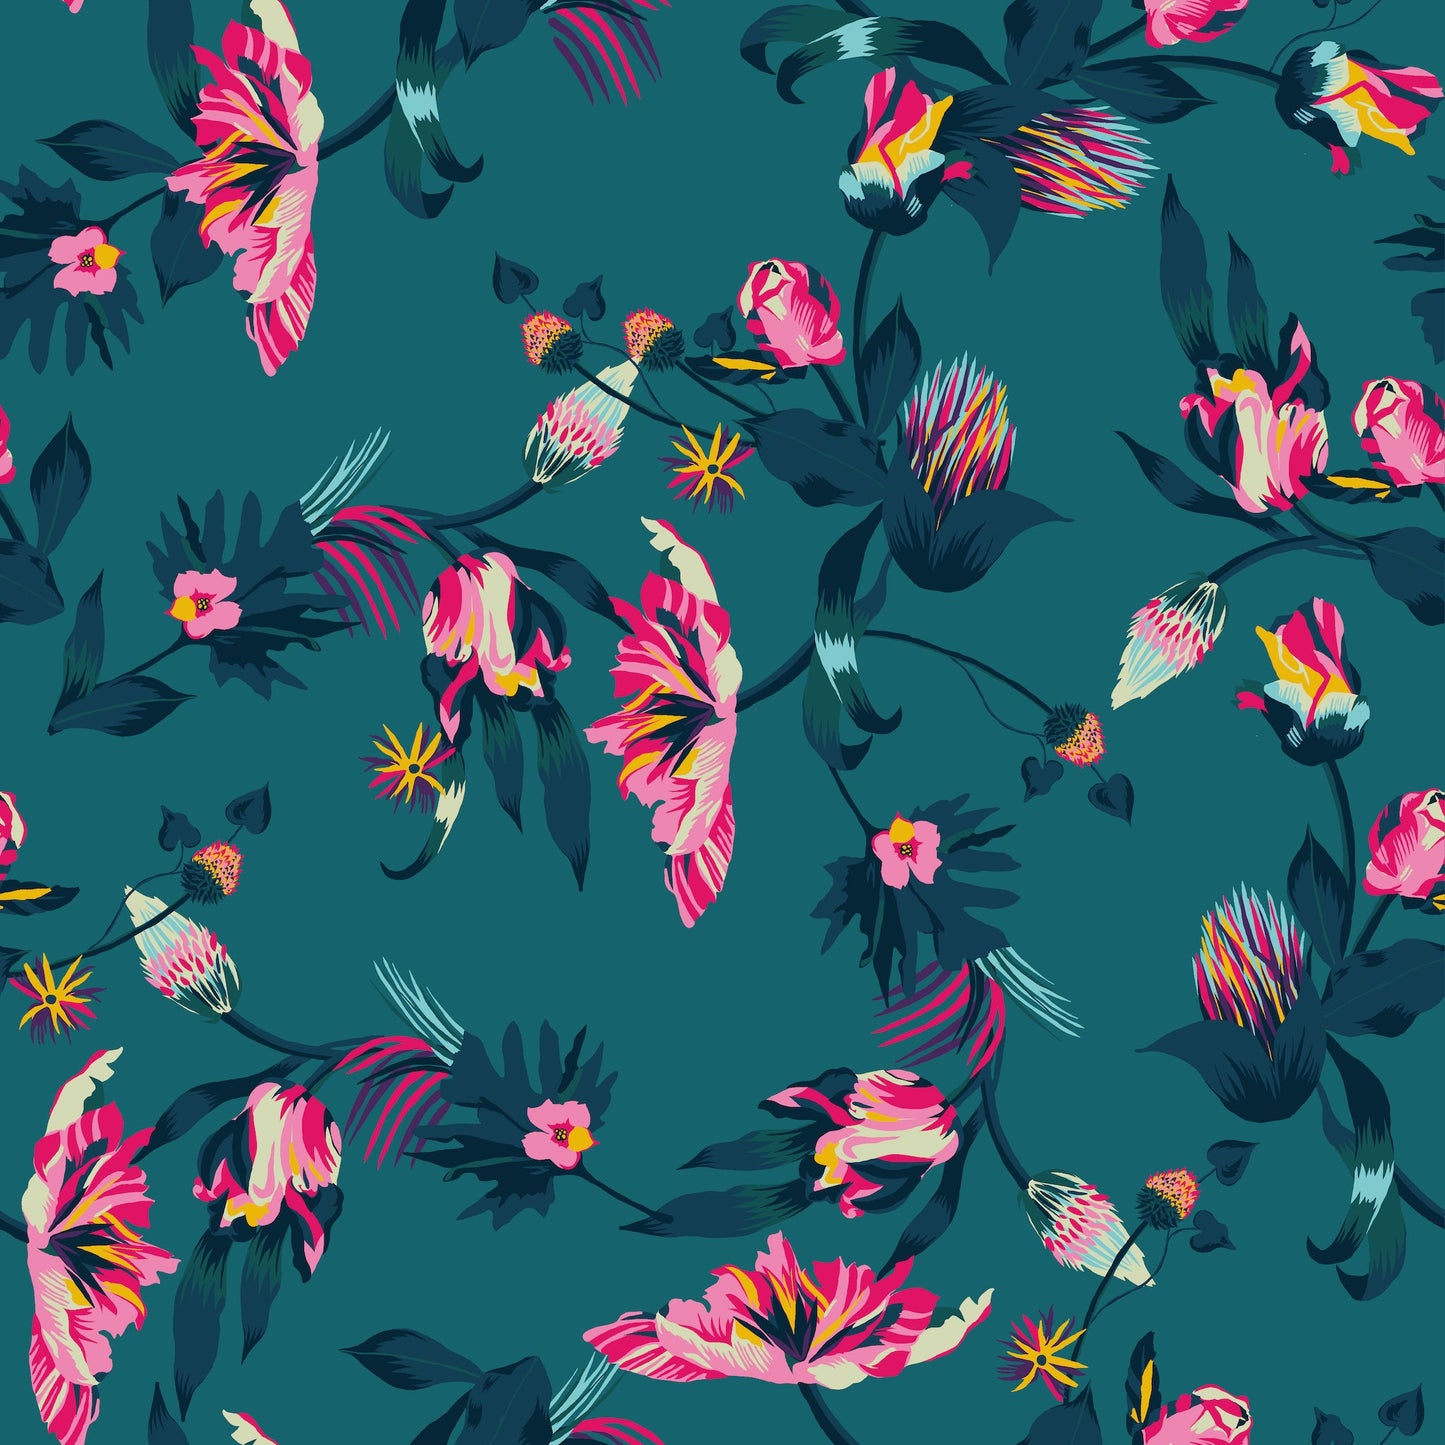 teal modern floral peel and stick removable fabric wallpaper